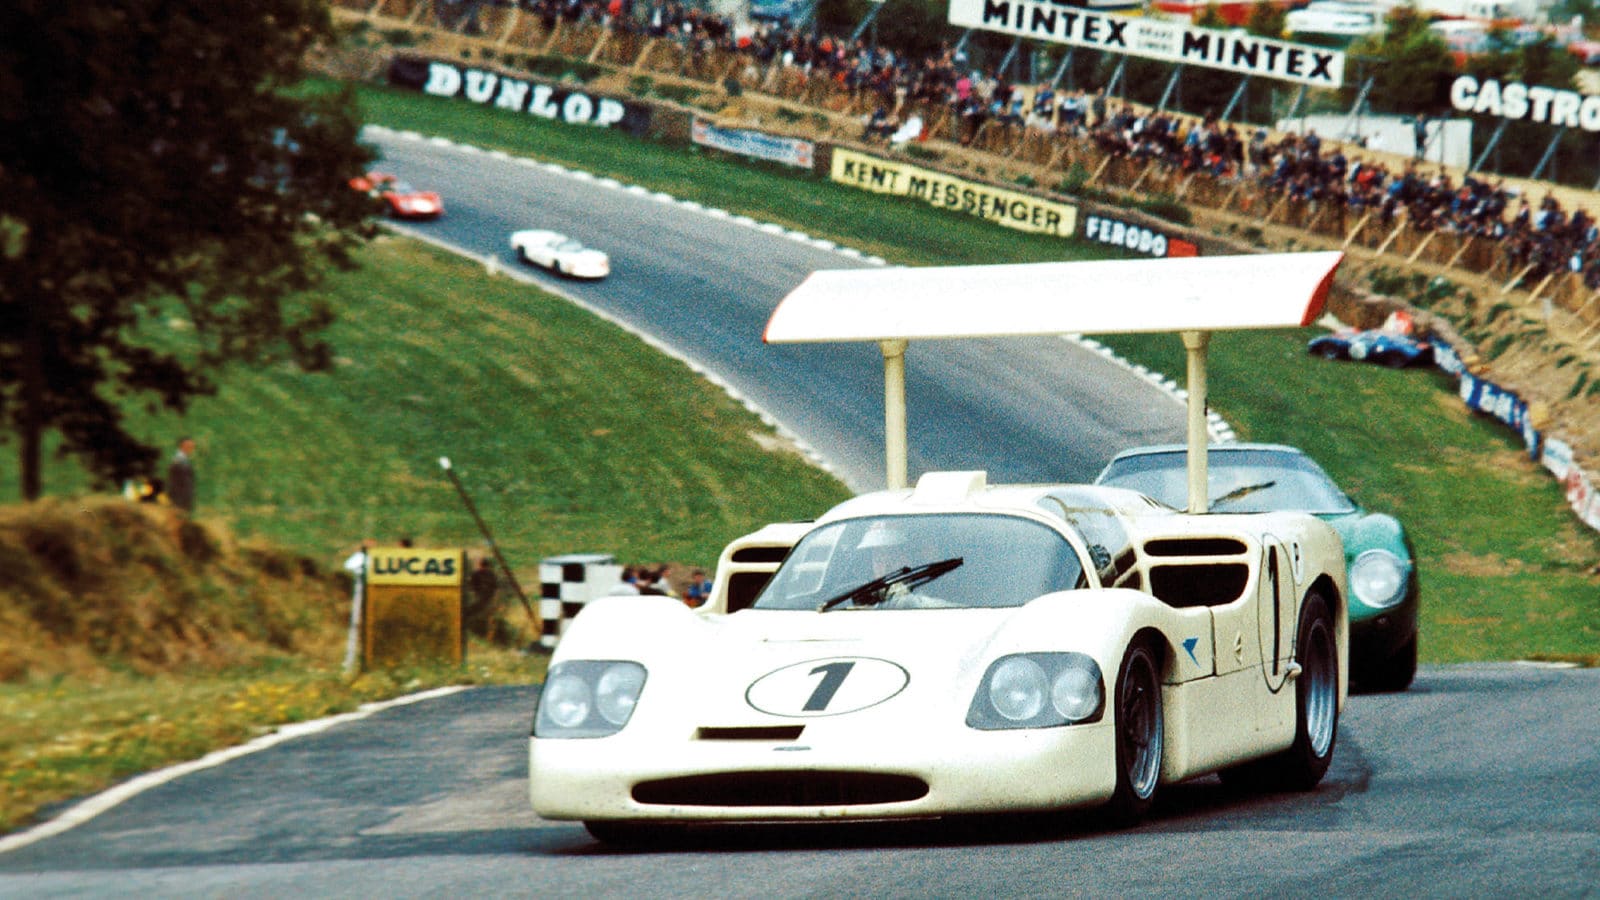 Mike Spence in Chaparral 2F at Brands Hatch